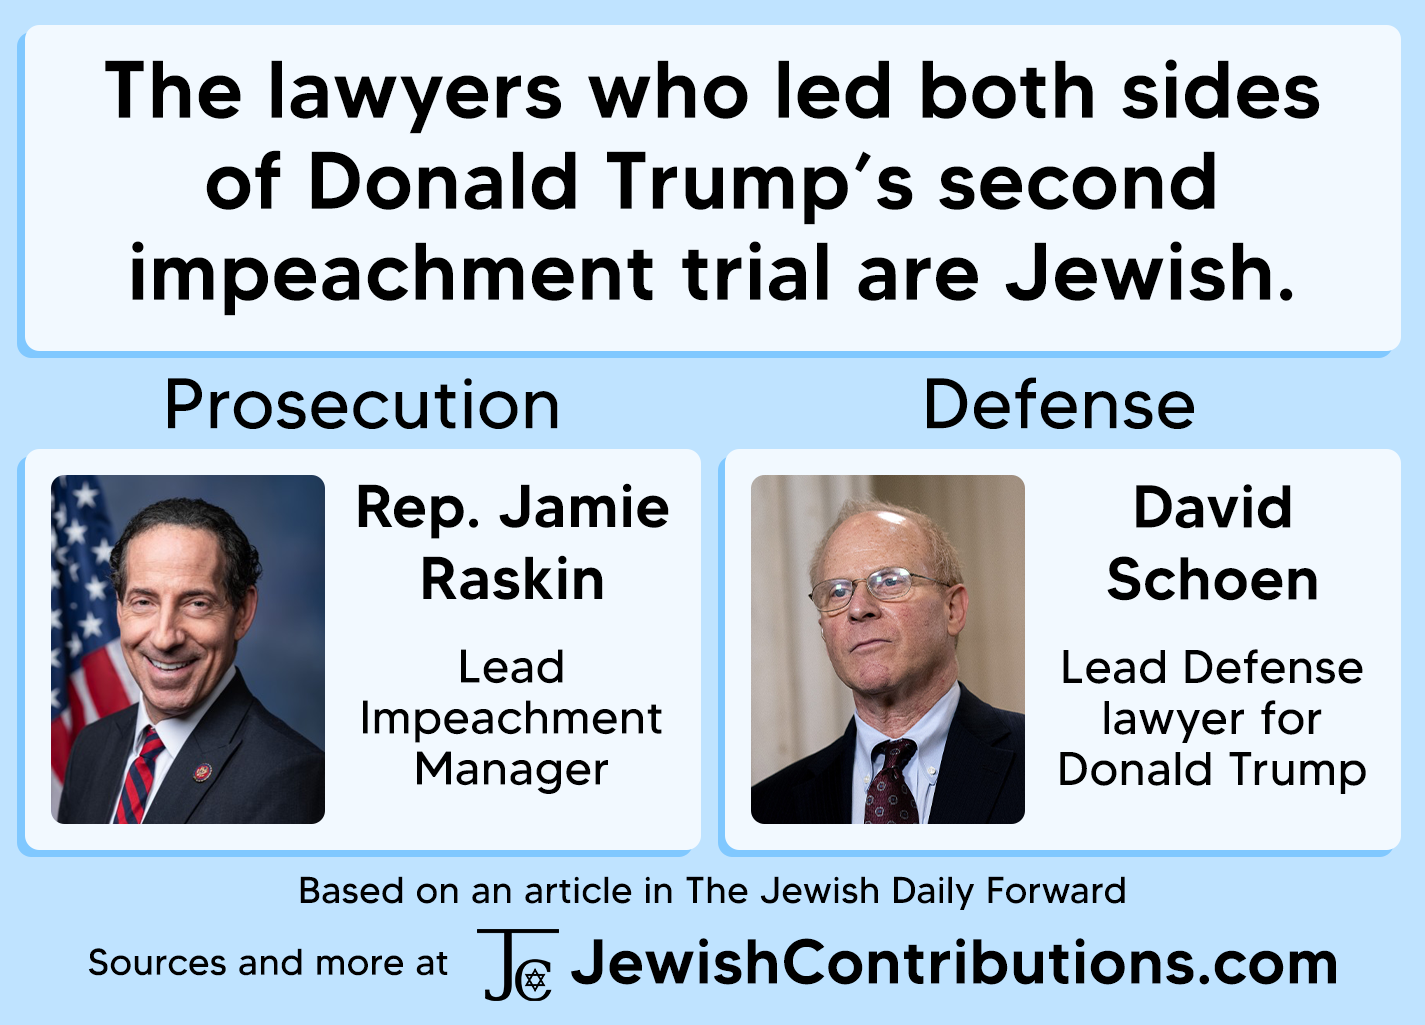 The lawyers leading both sides of the trials determining Donald Trump’s second impeachment are Jewish.